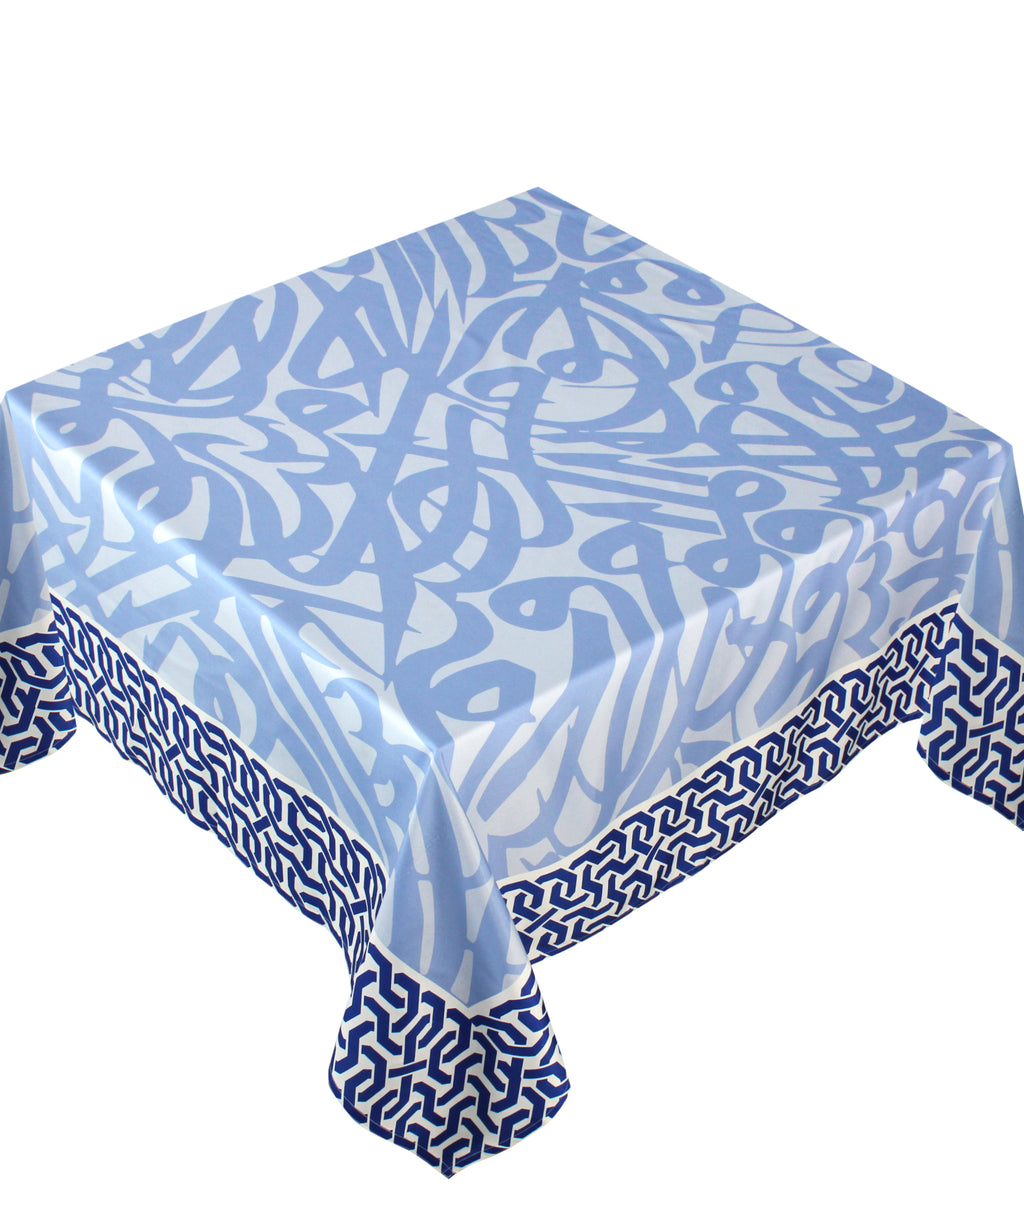 The blue calligraphy art table cover